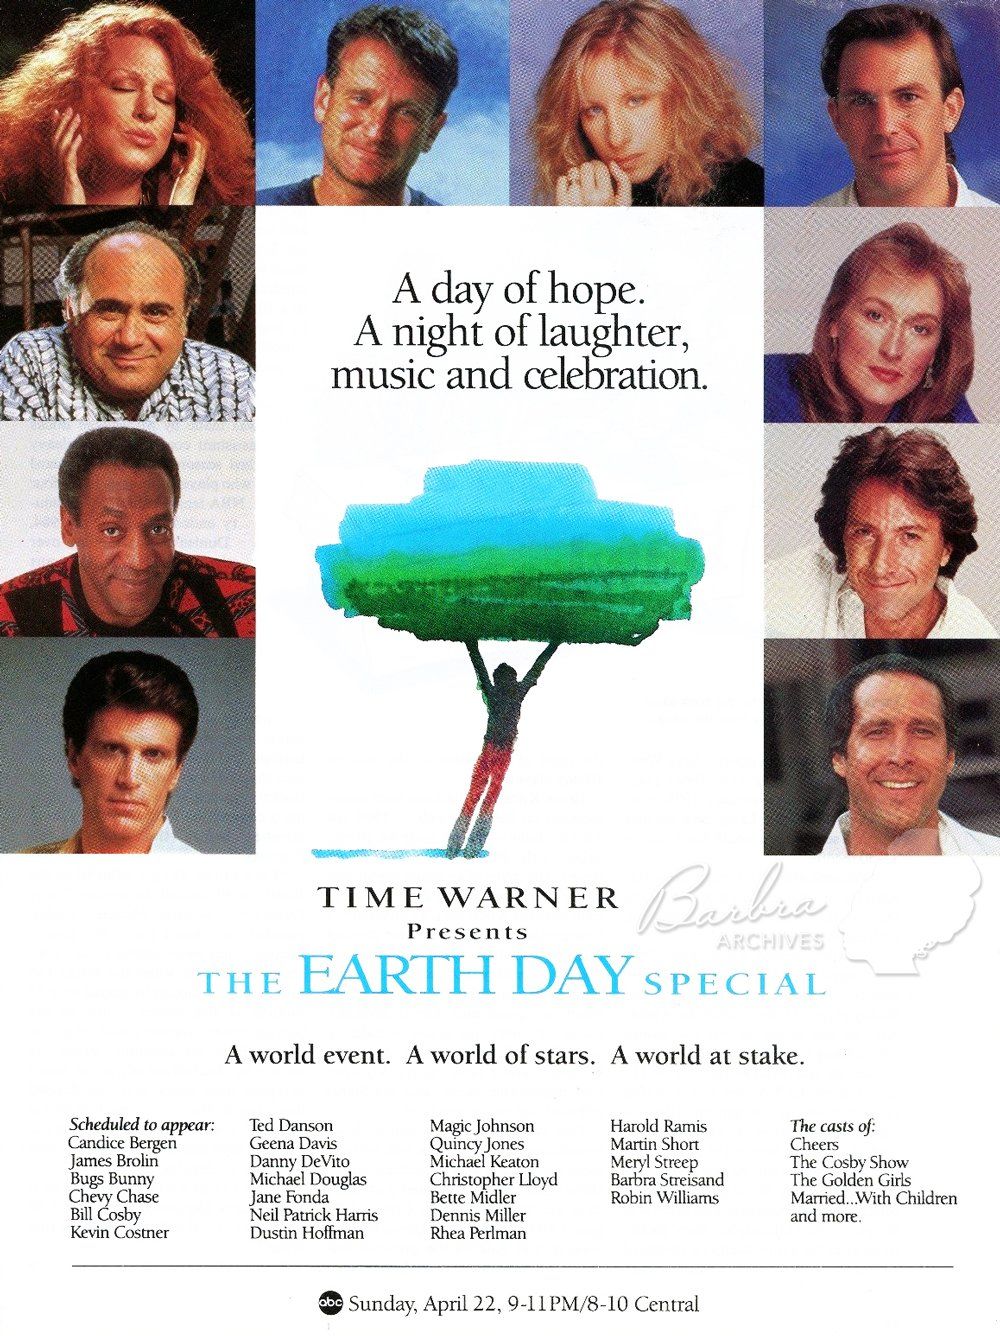 Color newspaper ad for The Earth Day Special